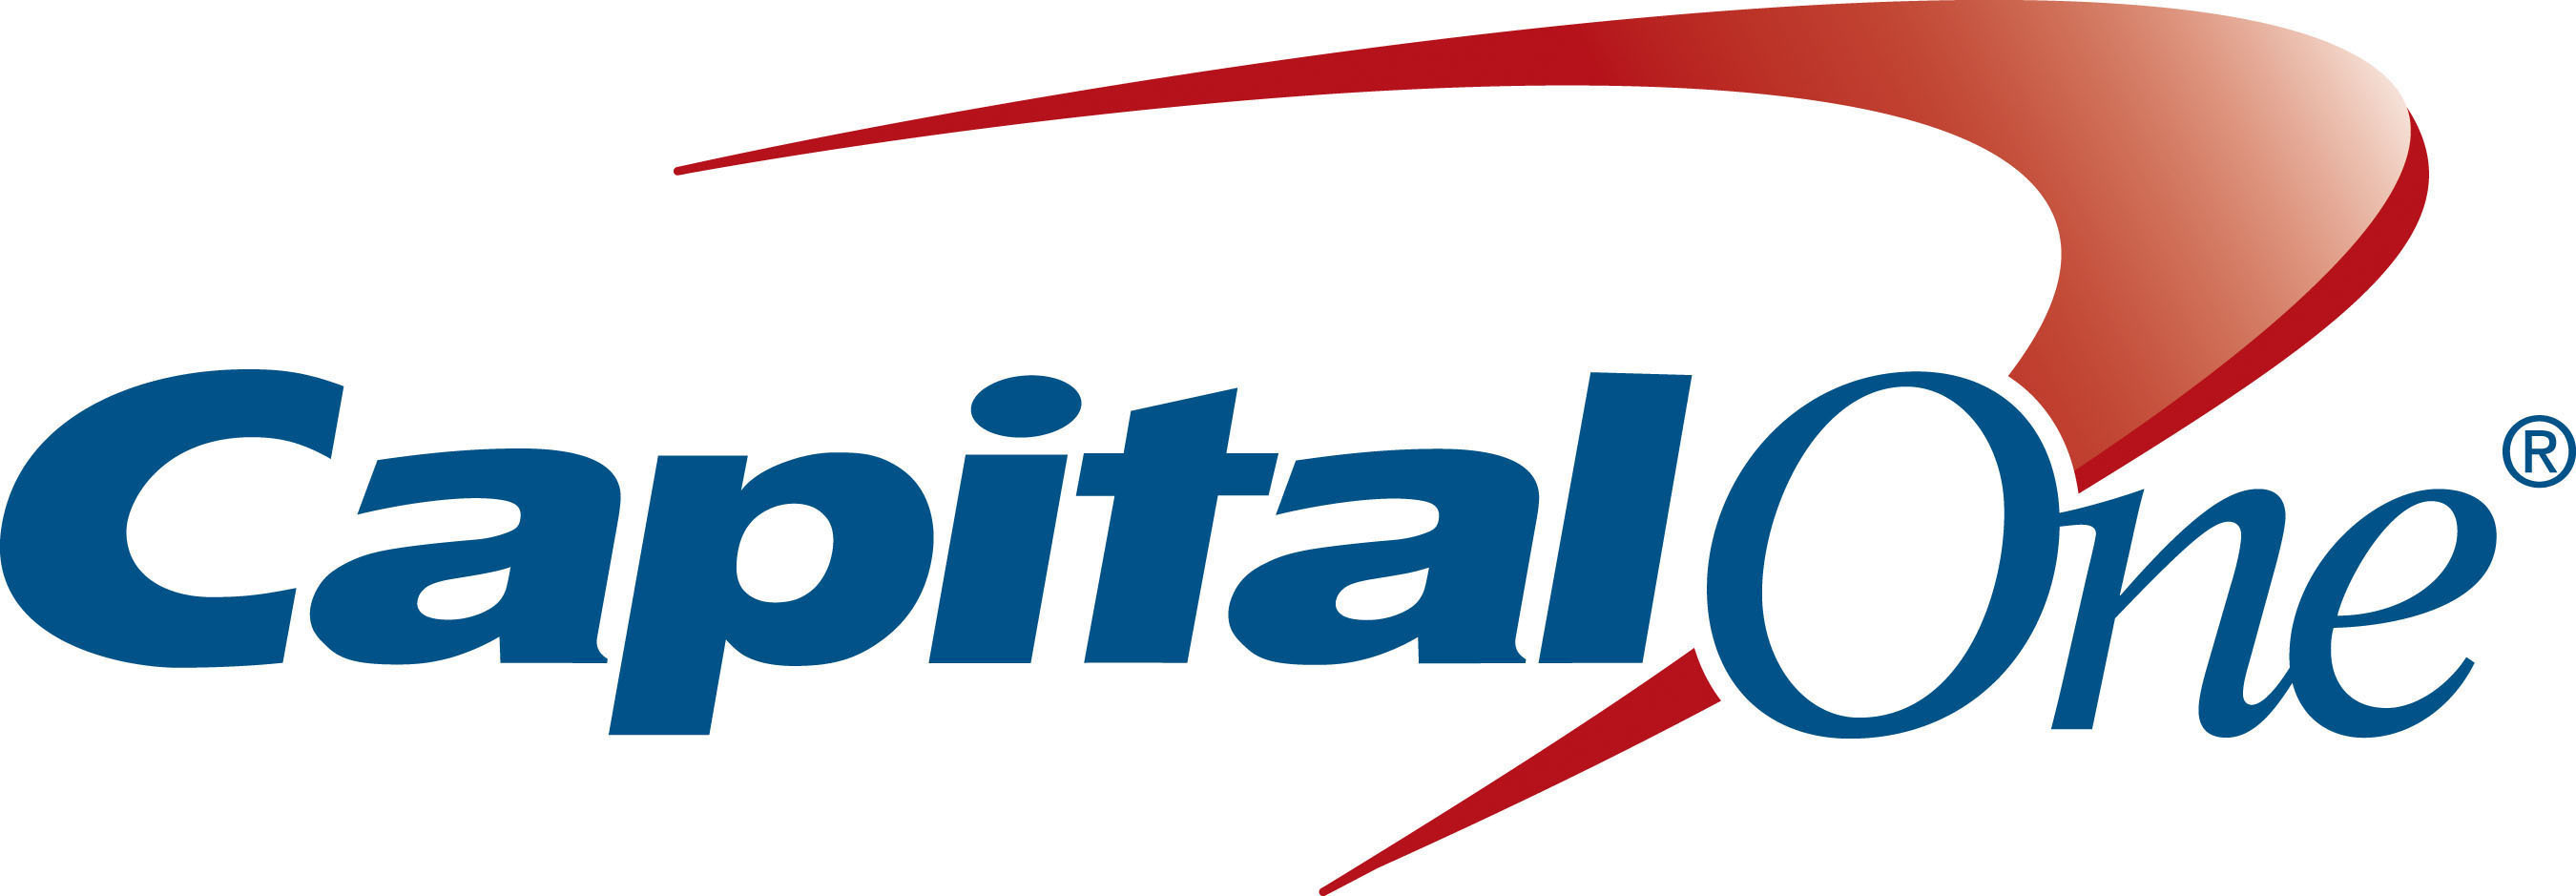 Capital One Financial Corporation, an official NCAA(R) Corporate Champion, announced the official winter standings for the Capital One Cup.